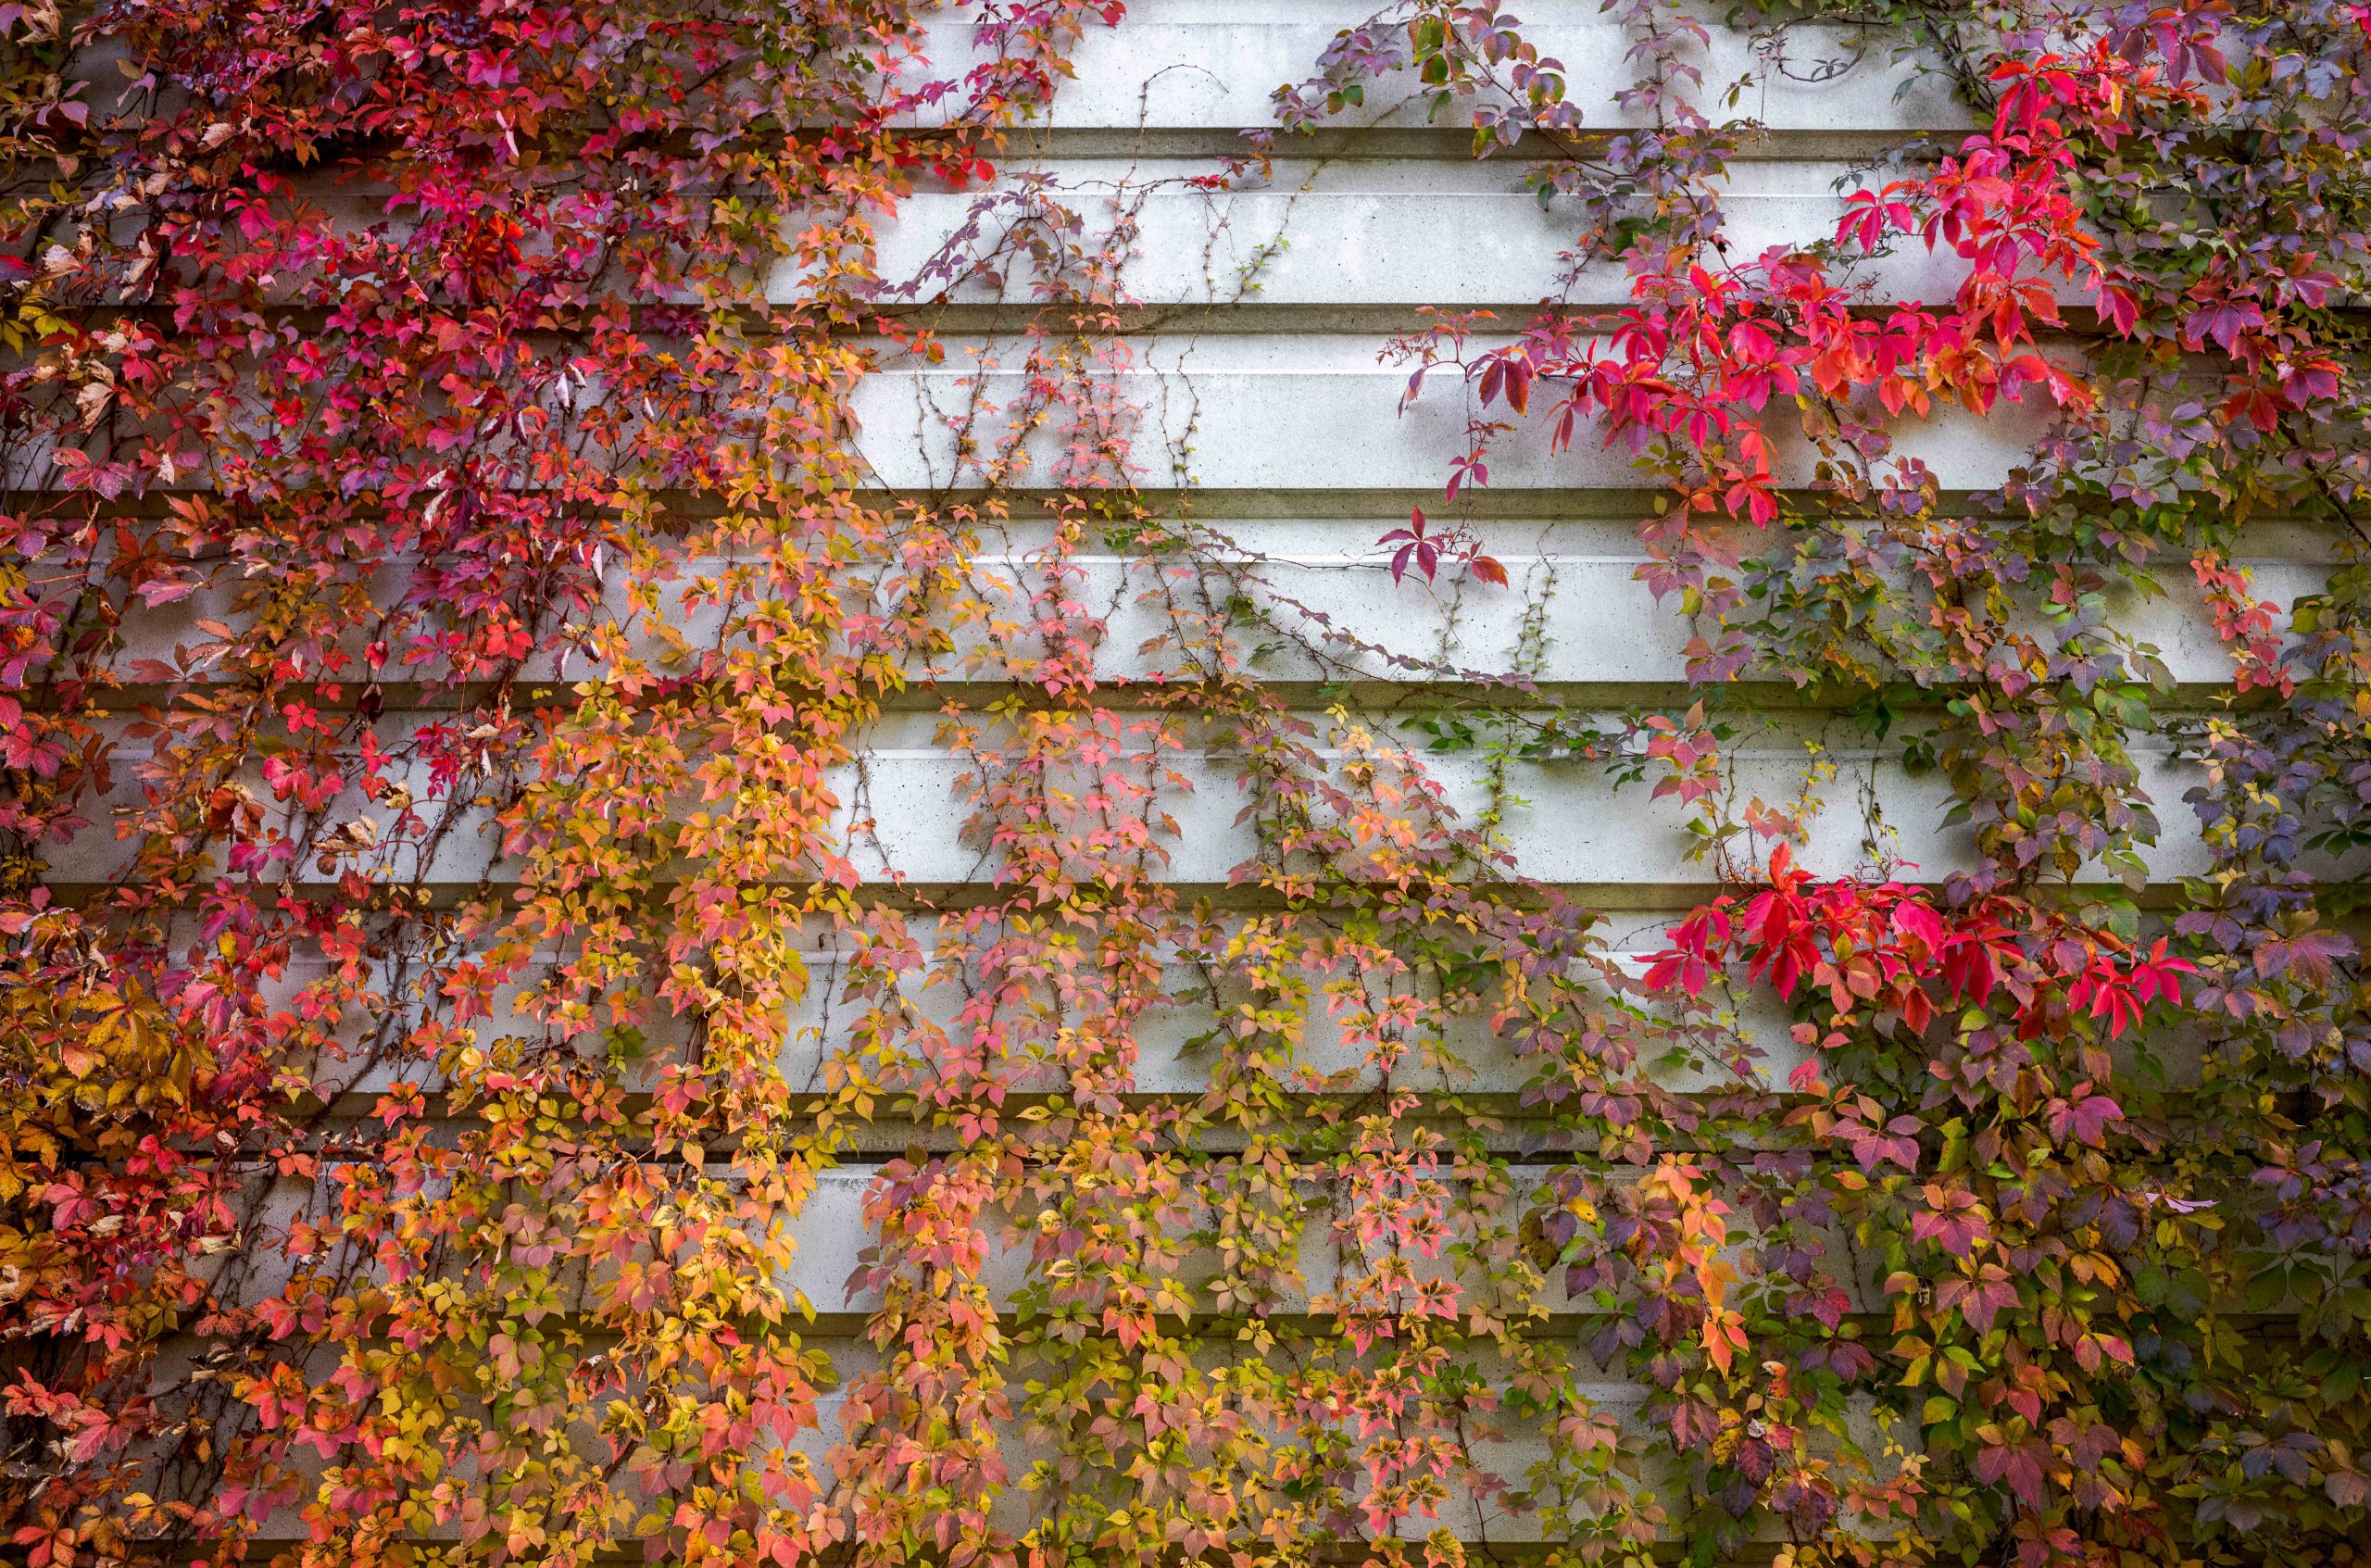 Vines in orange and red climb the paneled wall of a white building